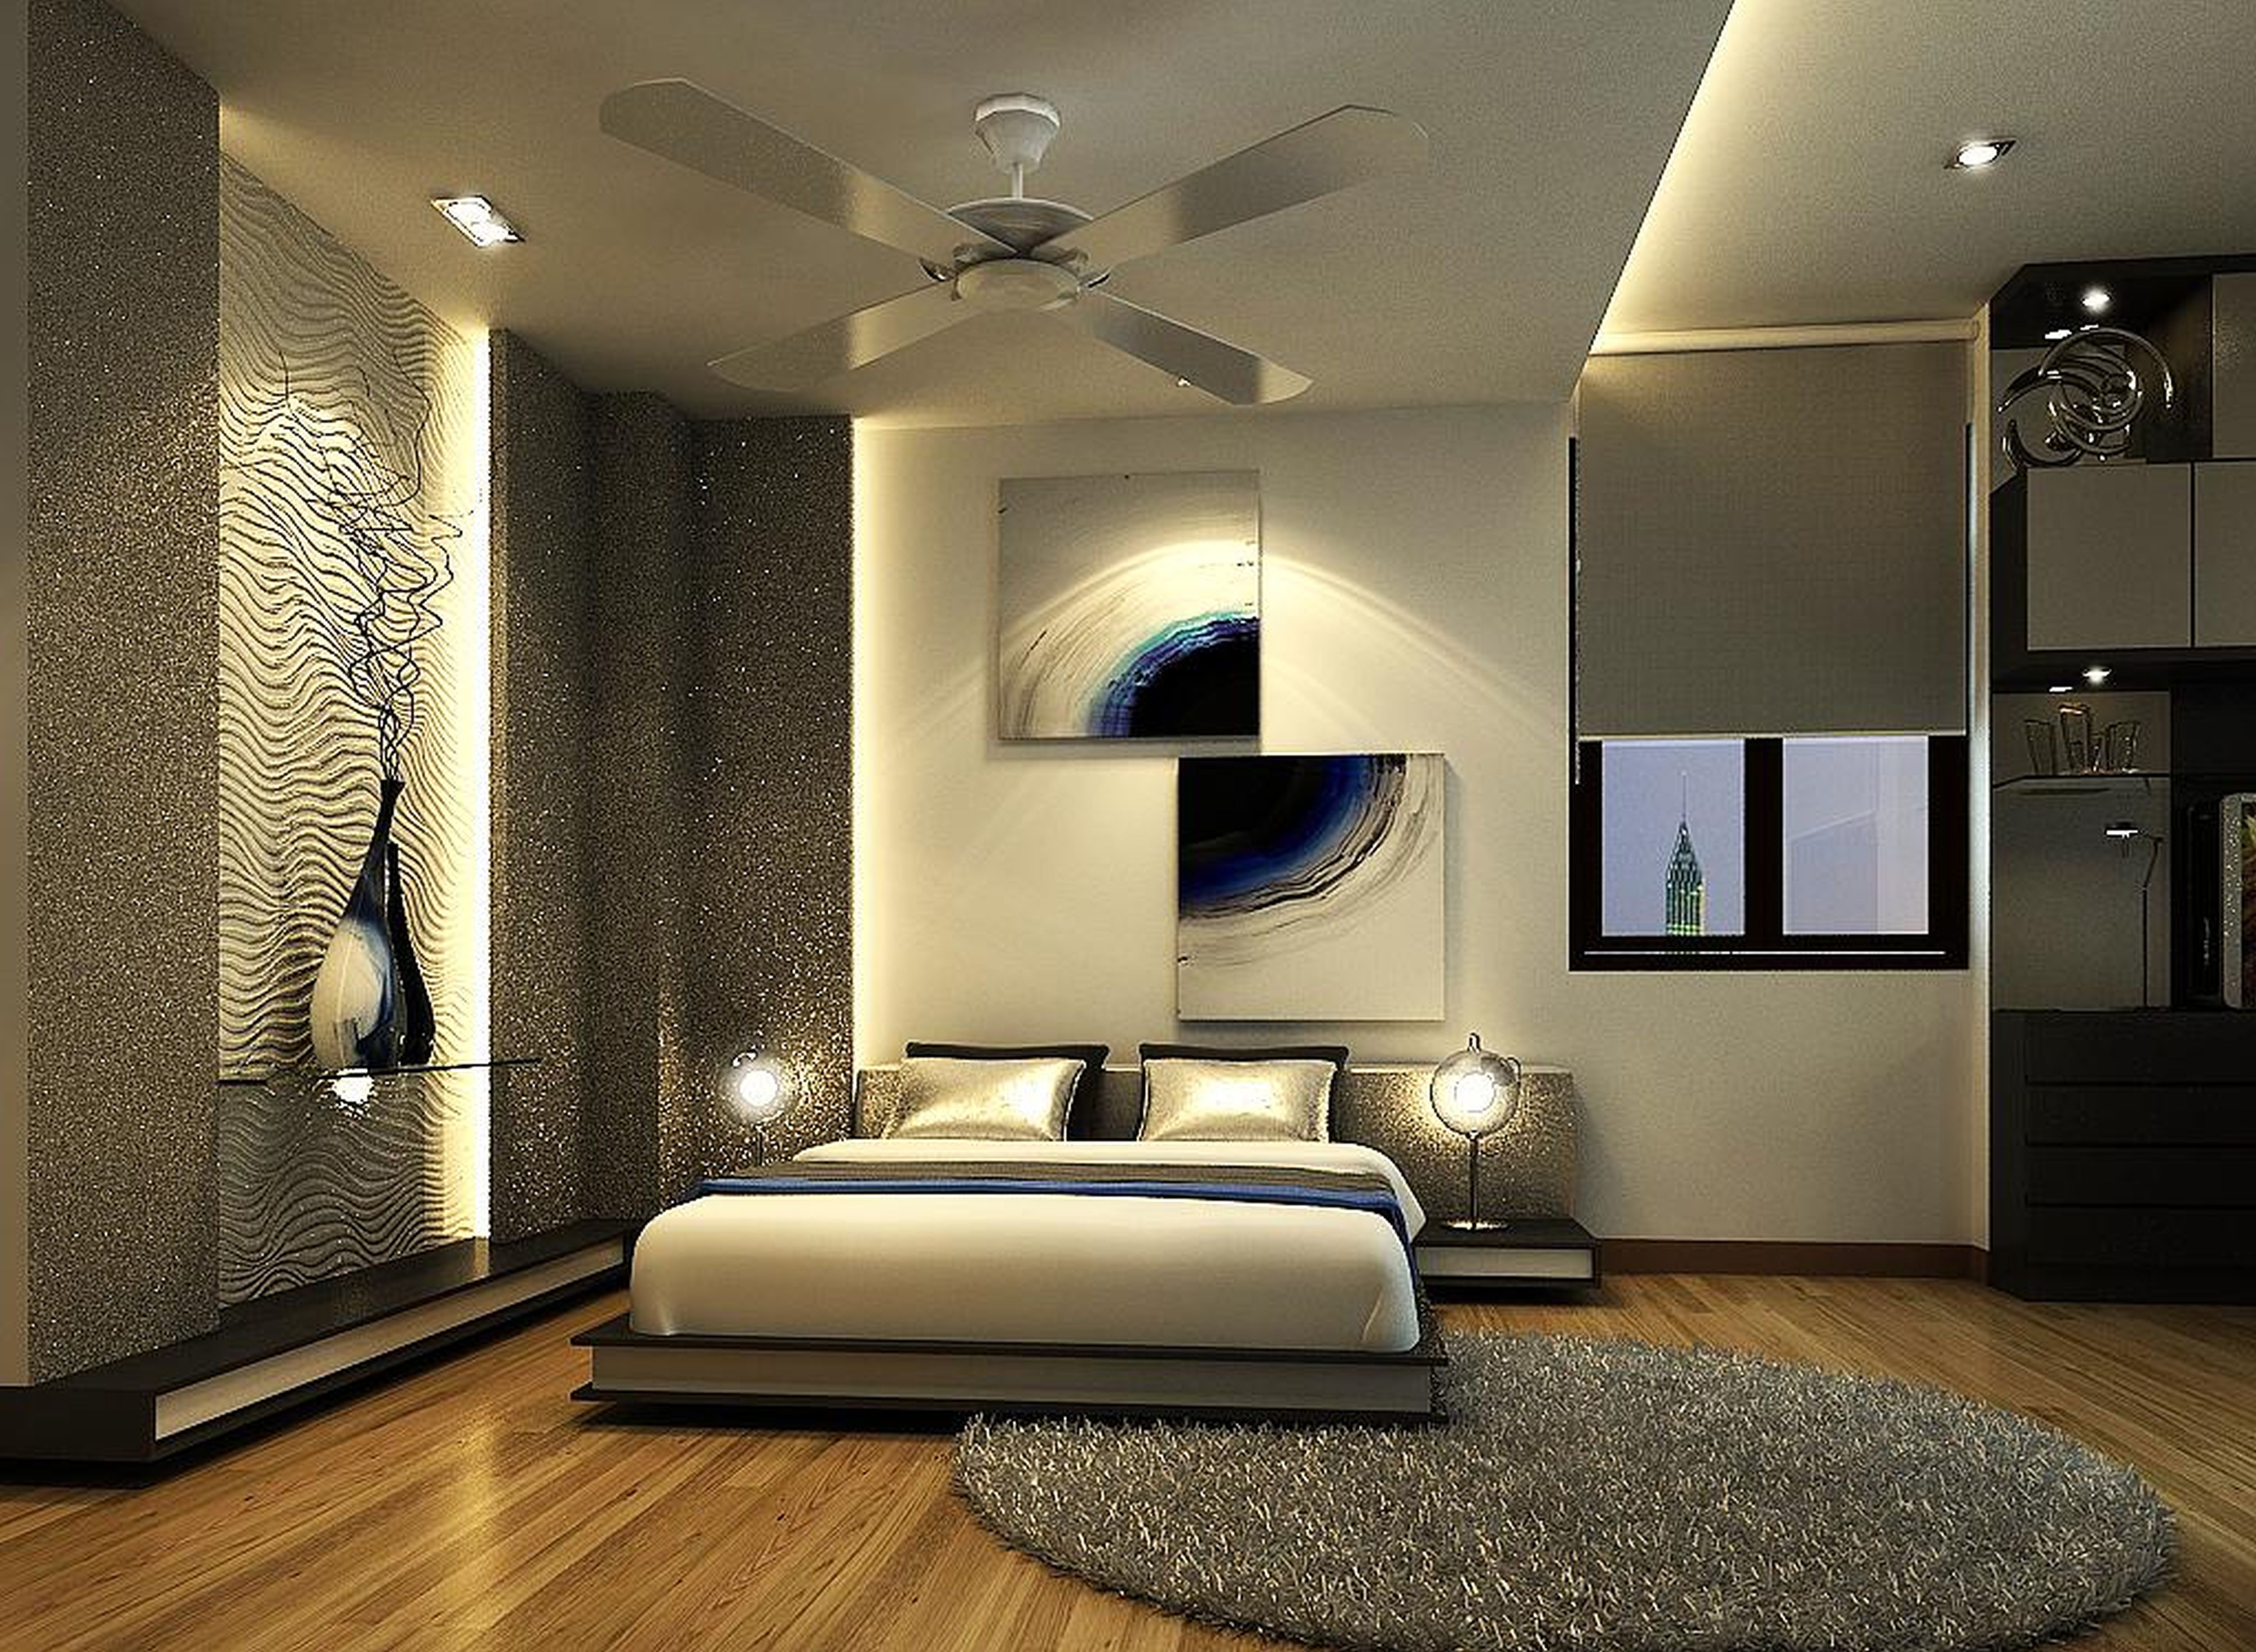 Home Interior Decorating Ideas For Bedrooms 12 Bedroom Decorating Ideas ...